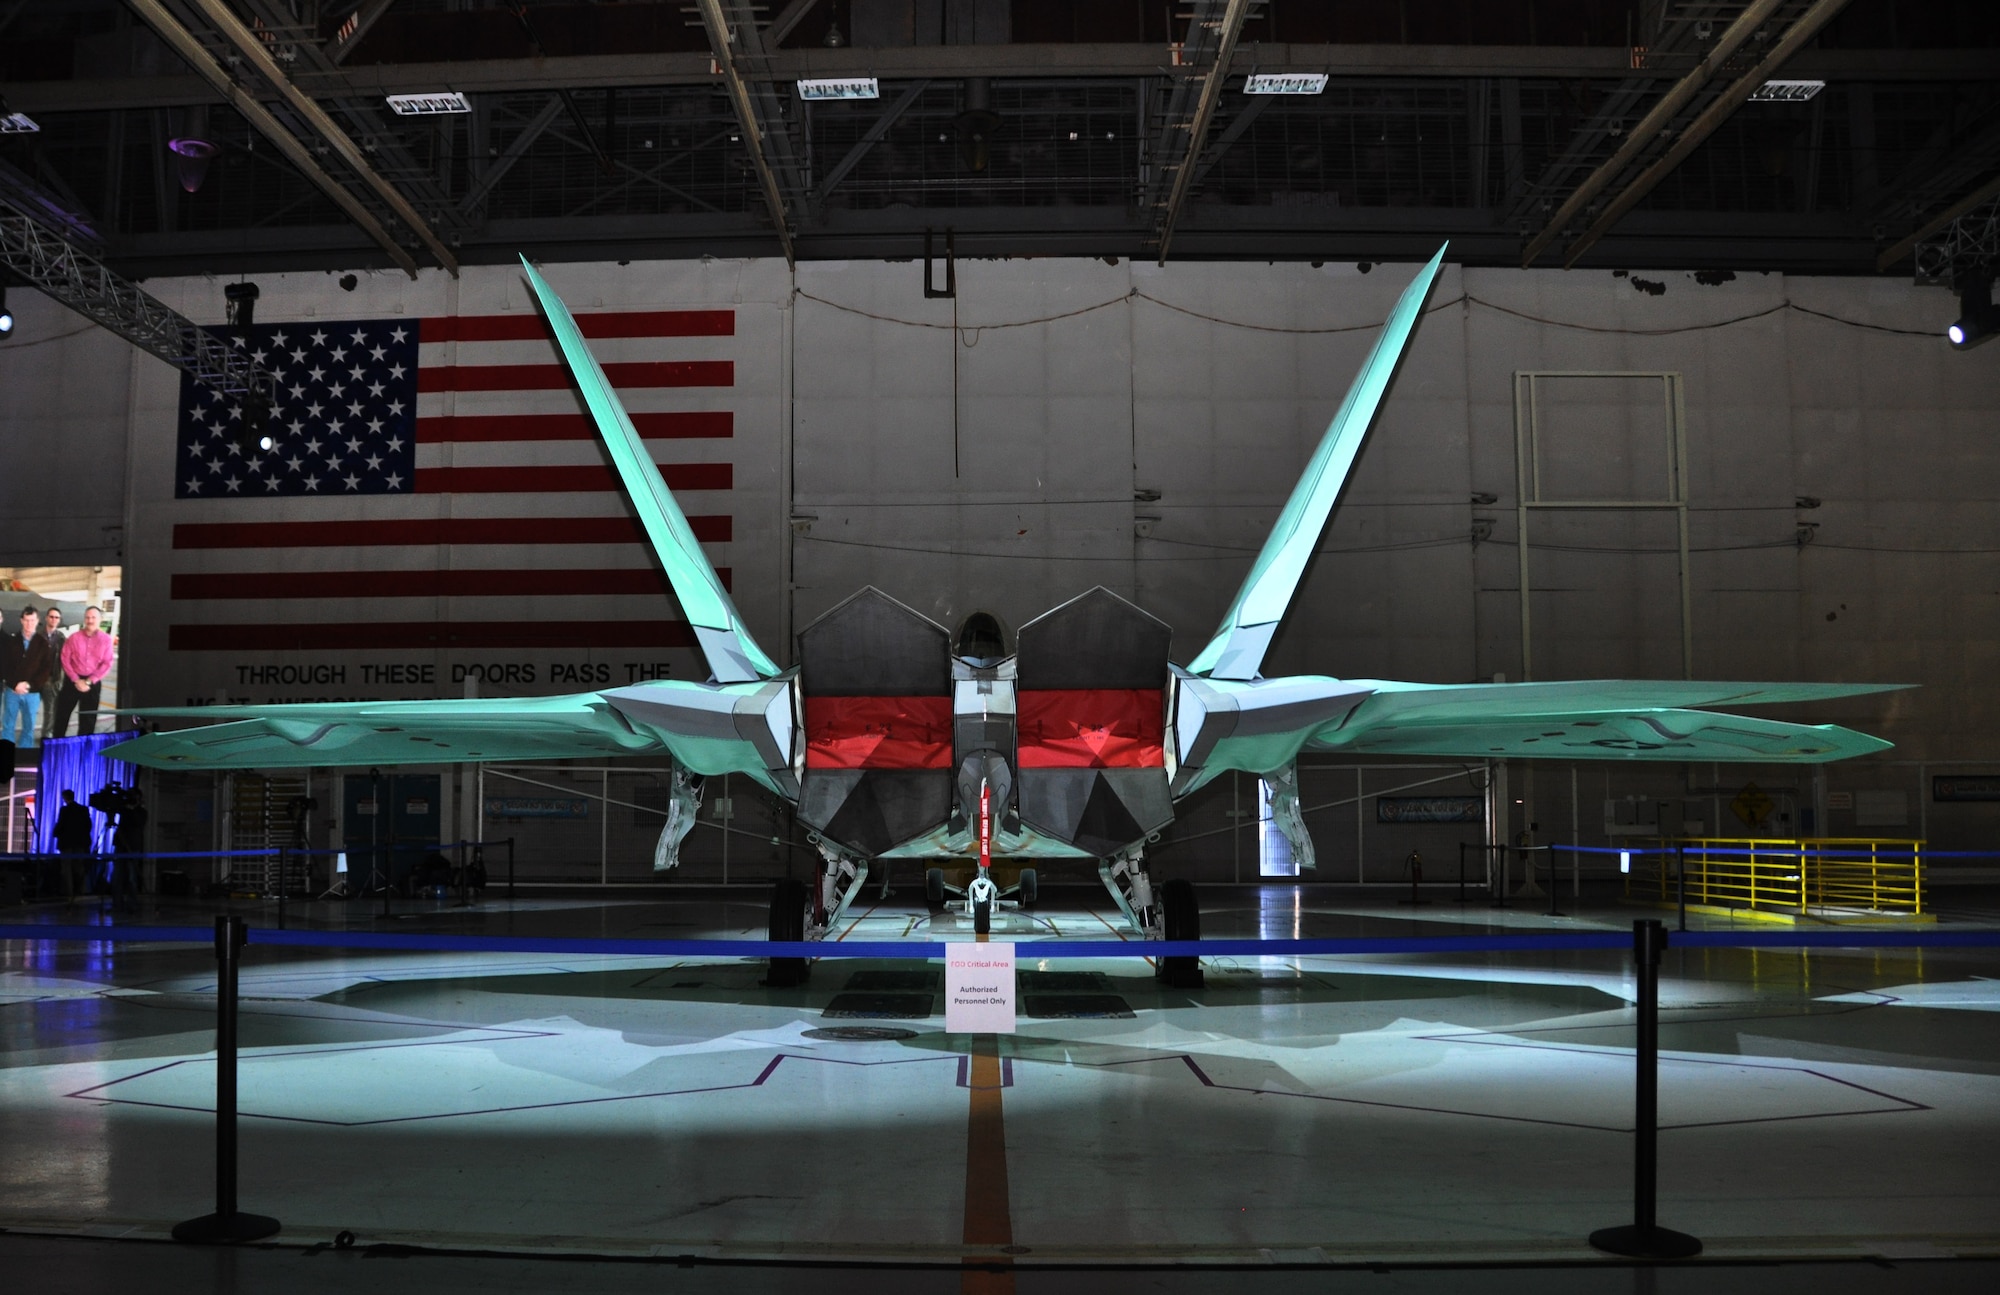 The final F-22 Raptor fighter jet is on display before being rolled off the Lockheed Martin assembly line at a ceremony at the Marietta, Ga. plant Dec. 13.  The jet is the last of 187 F-22s produced for the Air Force completing its operational fleet. (U.S. Air Force photo/ Senior Airman Danielle Purnell)